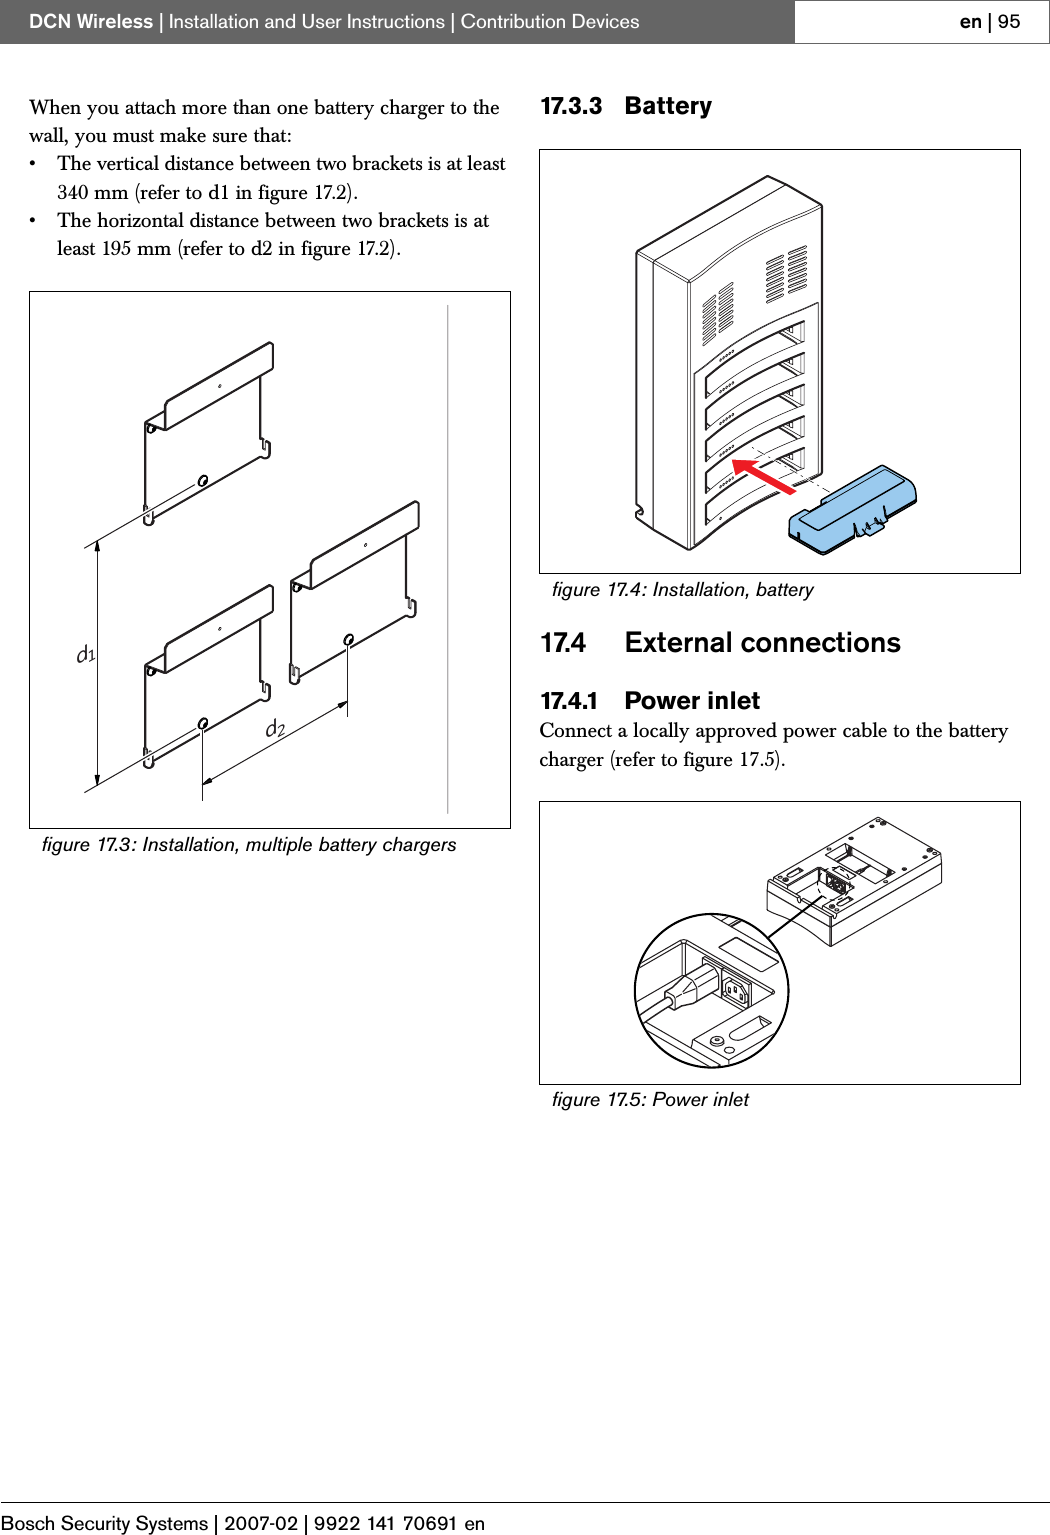 Page 66 of Bosch Security Systems DCNWAP Wireless Access Point User Manual Part 2